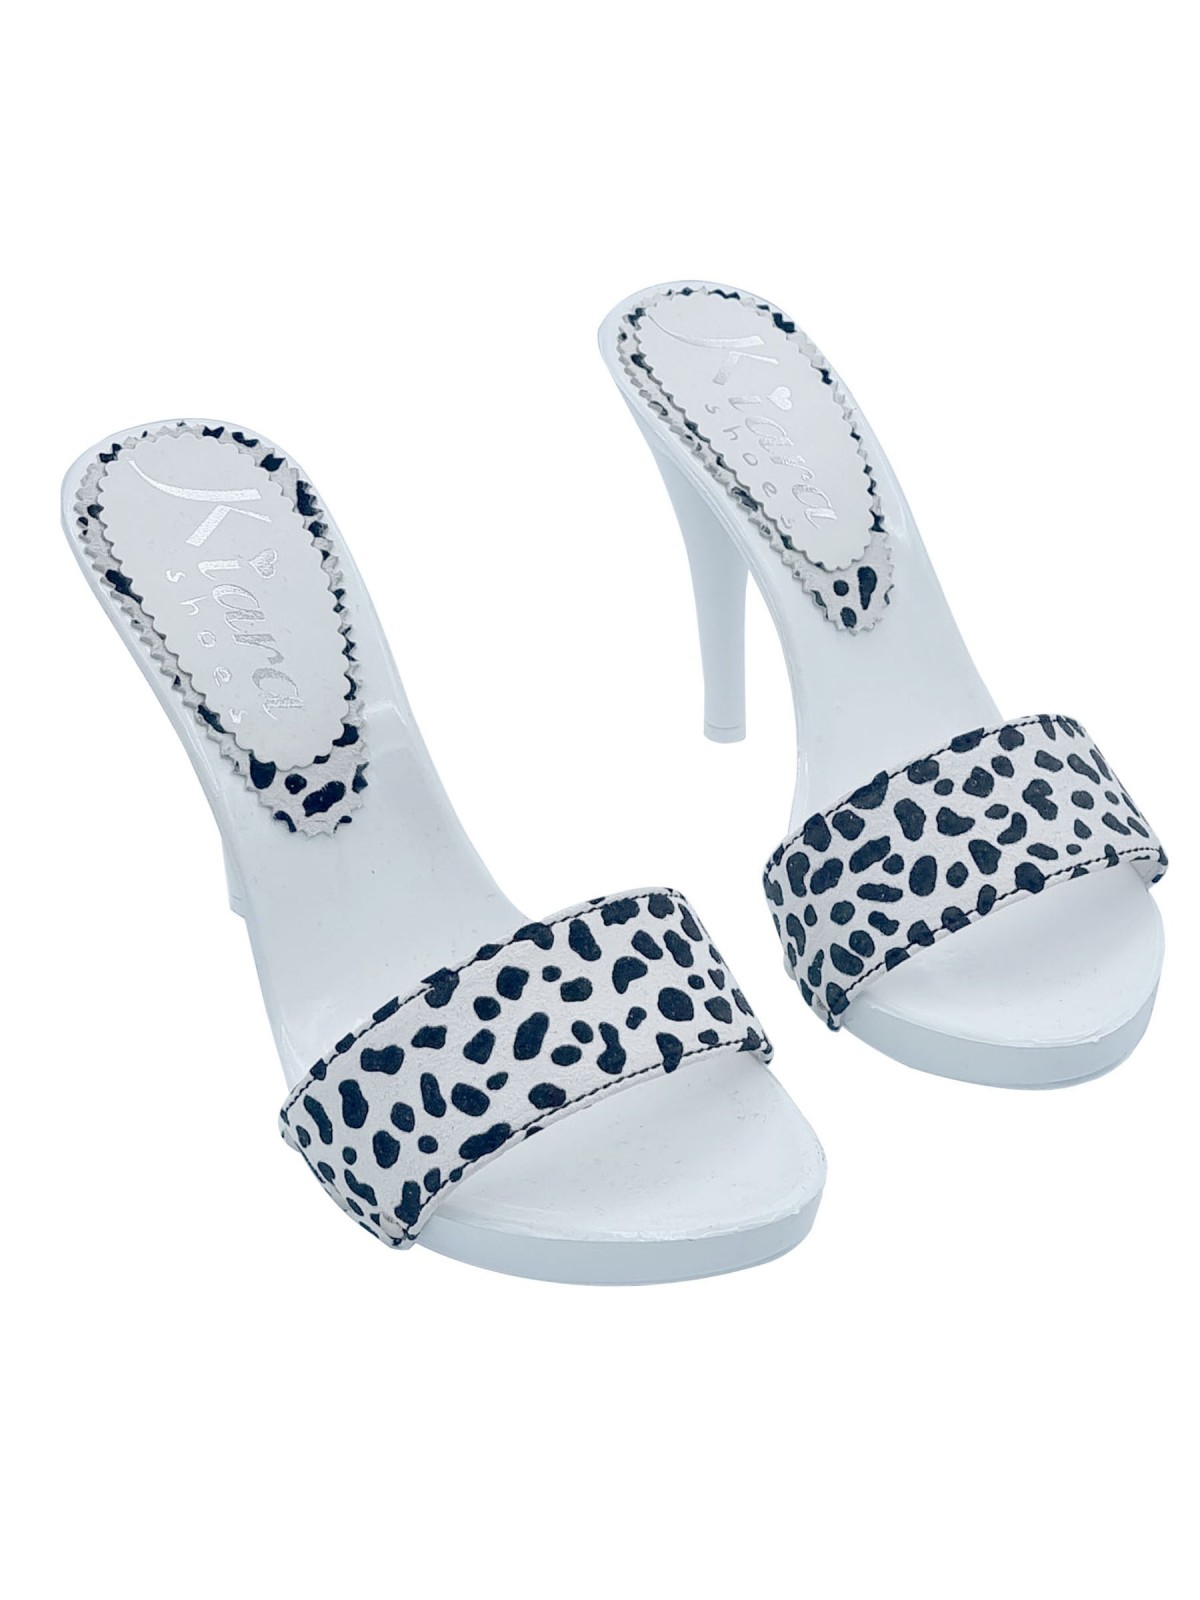 WHITE CLOGS WITH HEEL 12 CM